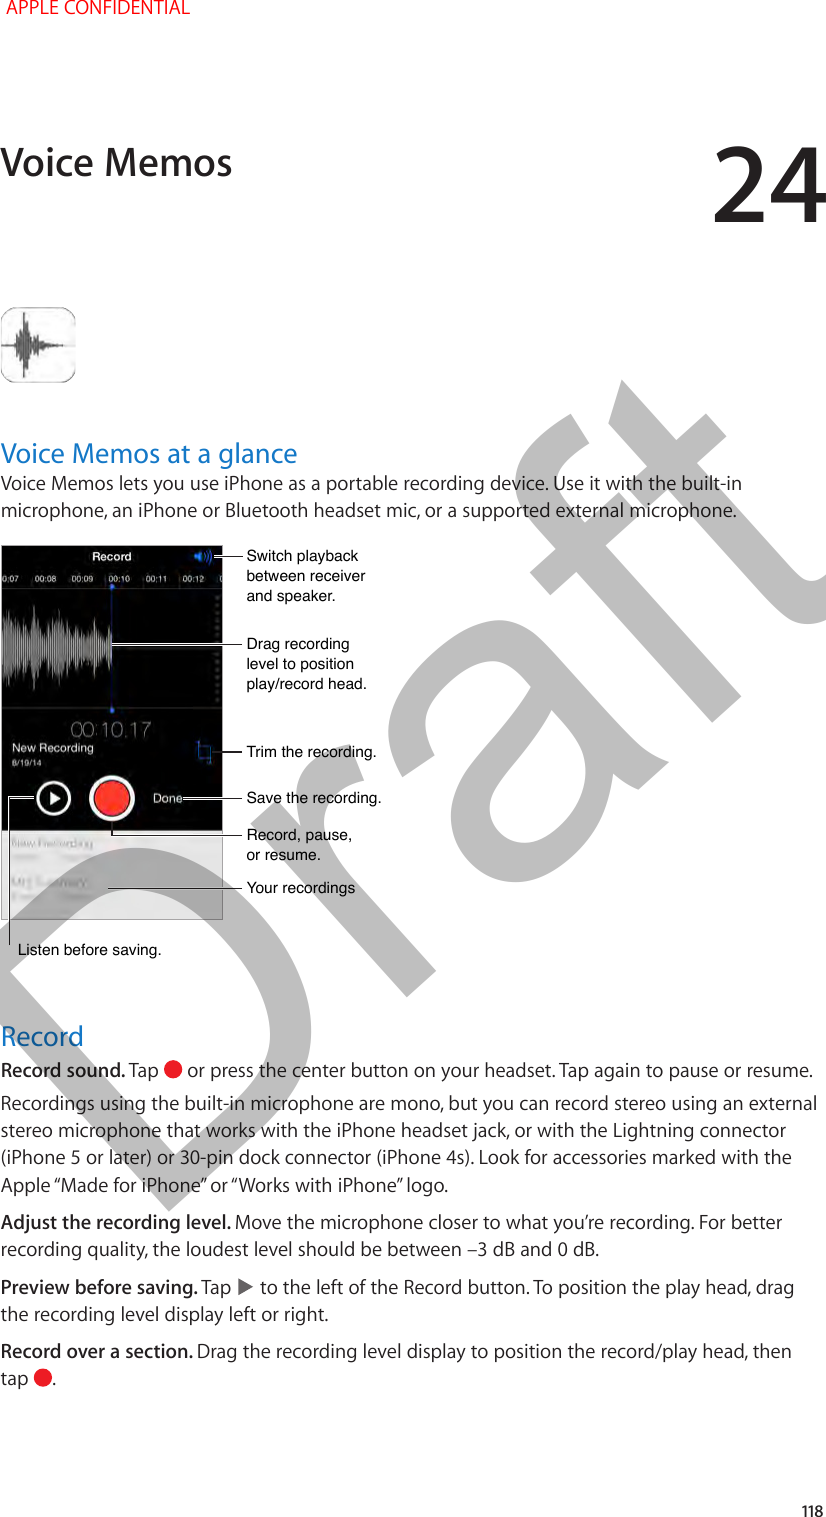 24   118Voice Memos at a glanceVoice Memos lets you use iPhone as a portable recording device. Use it with the built-in microphone, an iPhone or Bluetooth headset mic, or a supported external microphone.Drag recording level to position play/record head.Drag recording level to position play/record head.Record, pause, or resume.Record, pause, or resume.Trim the recording.Trim the recording.Switch playback between receiver and speaker.Switch playback between receiver and speaker.Save the recording.Save the recording.Your recordingsYour recordingsListen before saving.Listen before saving.RecordRecord sound. Tap   or press the center button on your headset. Tap again to pause or resume.Recordings using the built-in microphone are mono, but you can record stereo using an external stereo microphone that works with the iPhone headset jack, or with the Lightning connector (iPhone 5 or later) or 30-pin dock connector (iPhone 4s). Look for accessories marked with the Adjust the recording level. Move the microphone closer to what you’re recording. For better recording quality, the loudest level should be between –3 dB and 0 dB.Preview before saving. Tap   to the left of the Record button. To position the play head, drag the recording level display left or right.Record over a section. Drag the recording level display to position the record/play head, then tap  .Voice Memos APPLE CONFIDENTIALDraft